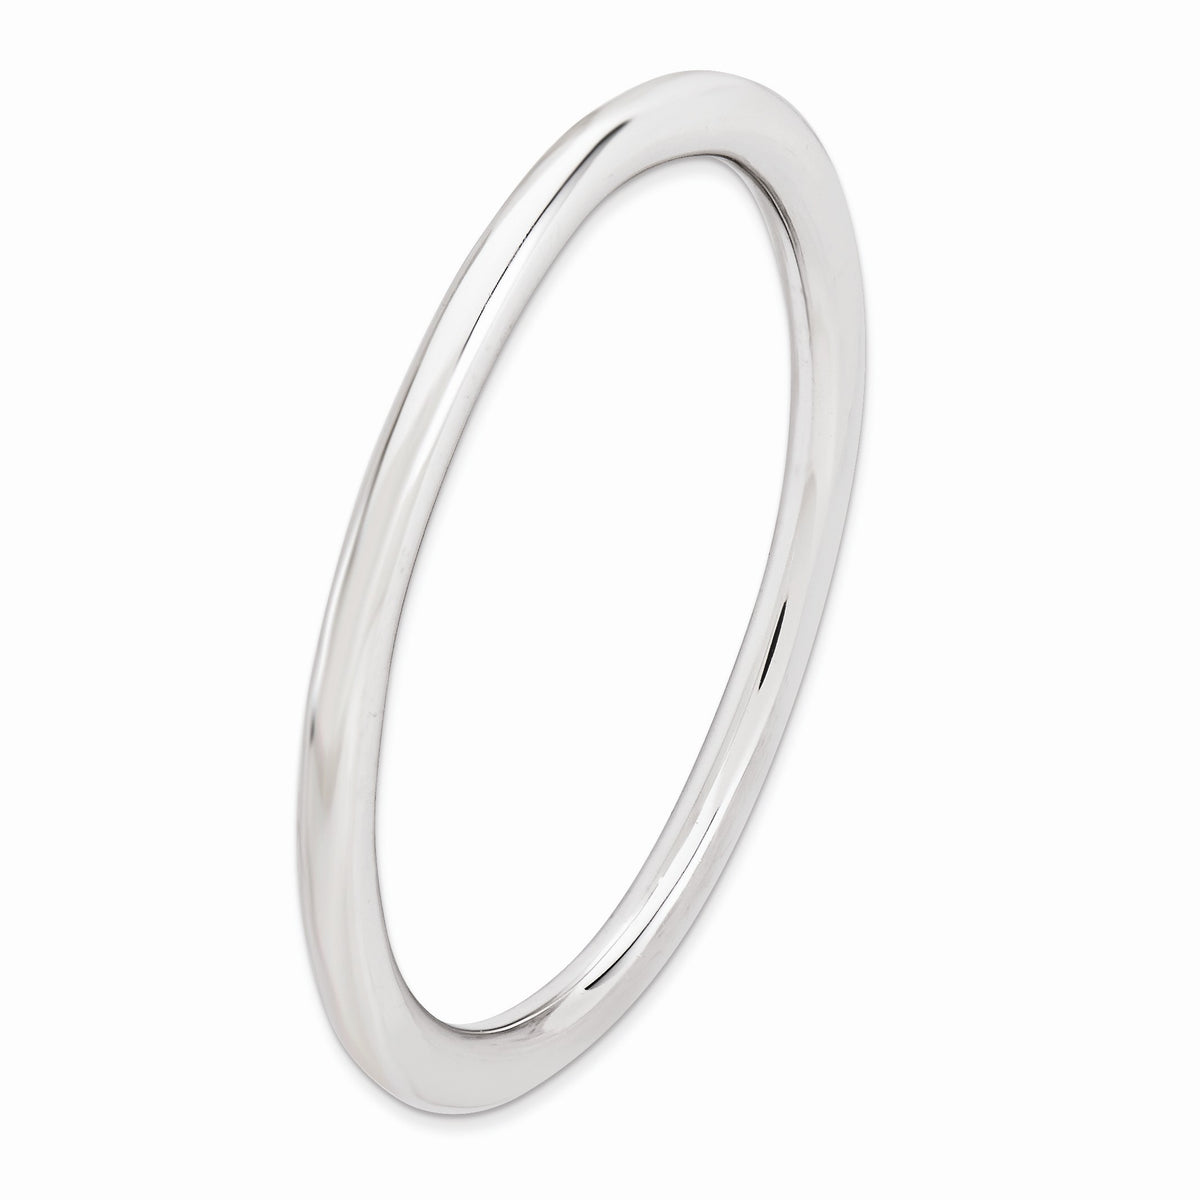 Alternate view of the 1mm Rhodium Plated Sterling Silver Stackable Polished Elegant Band by The Black Bow Jewelry Co.